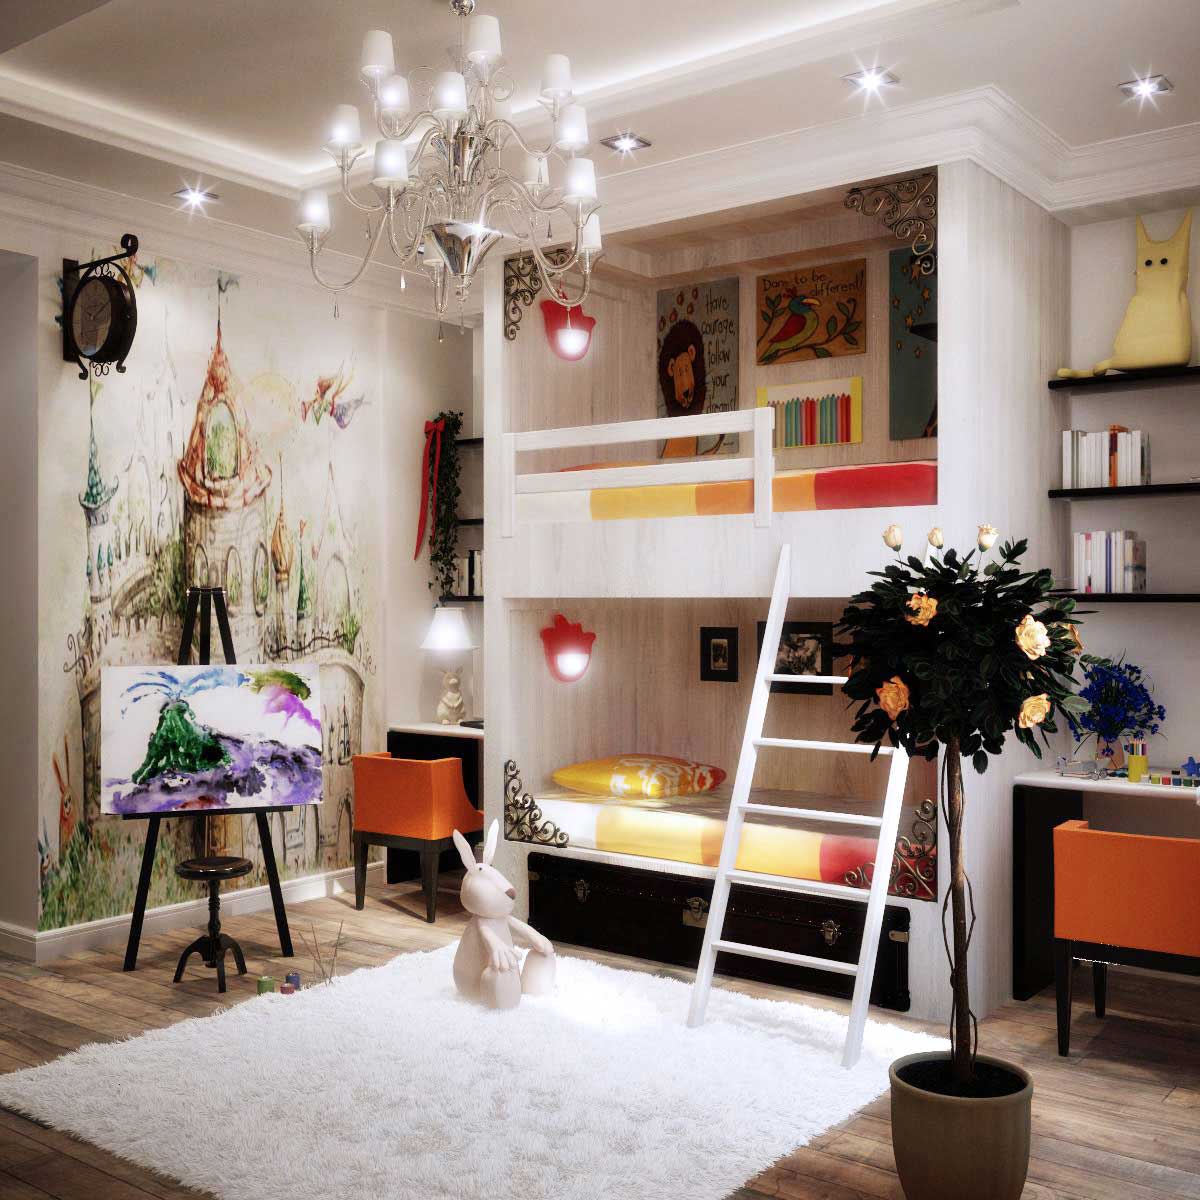 Kids Room Colorful Charming Kids Room Ideas And Colorful Kids Room Design With Laminate Flooring Kids Room Decorating Also Beautiful White Fur Rug Kids Room Models With Flower Floor Lamp Kids Room Design Ideas Decoration The Important Aspect Of The Kids Room Ideas